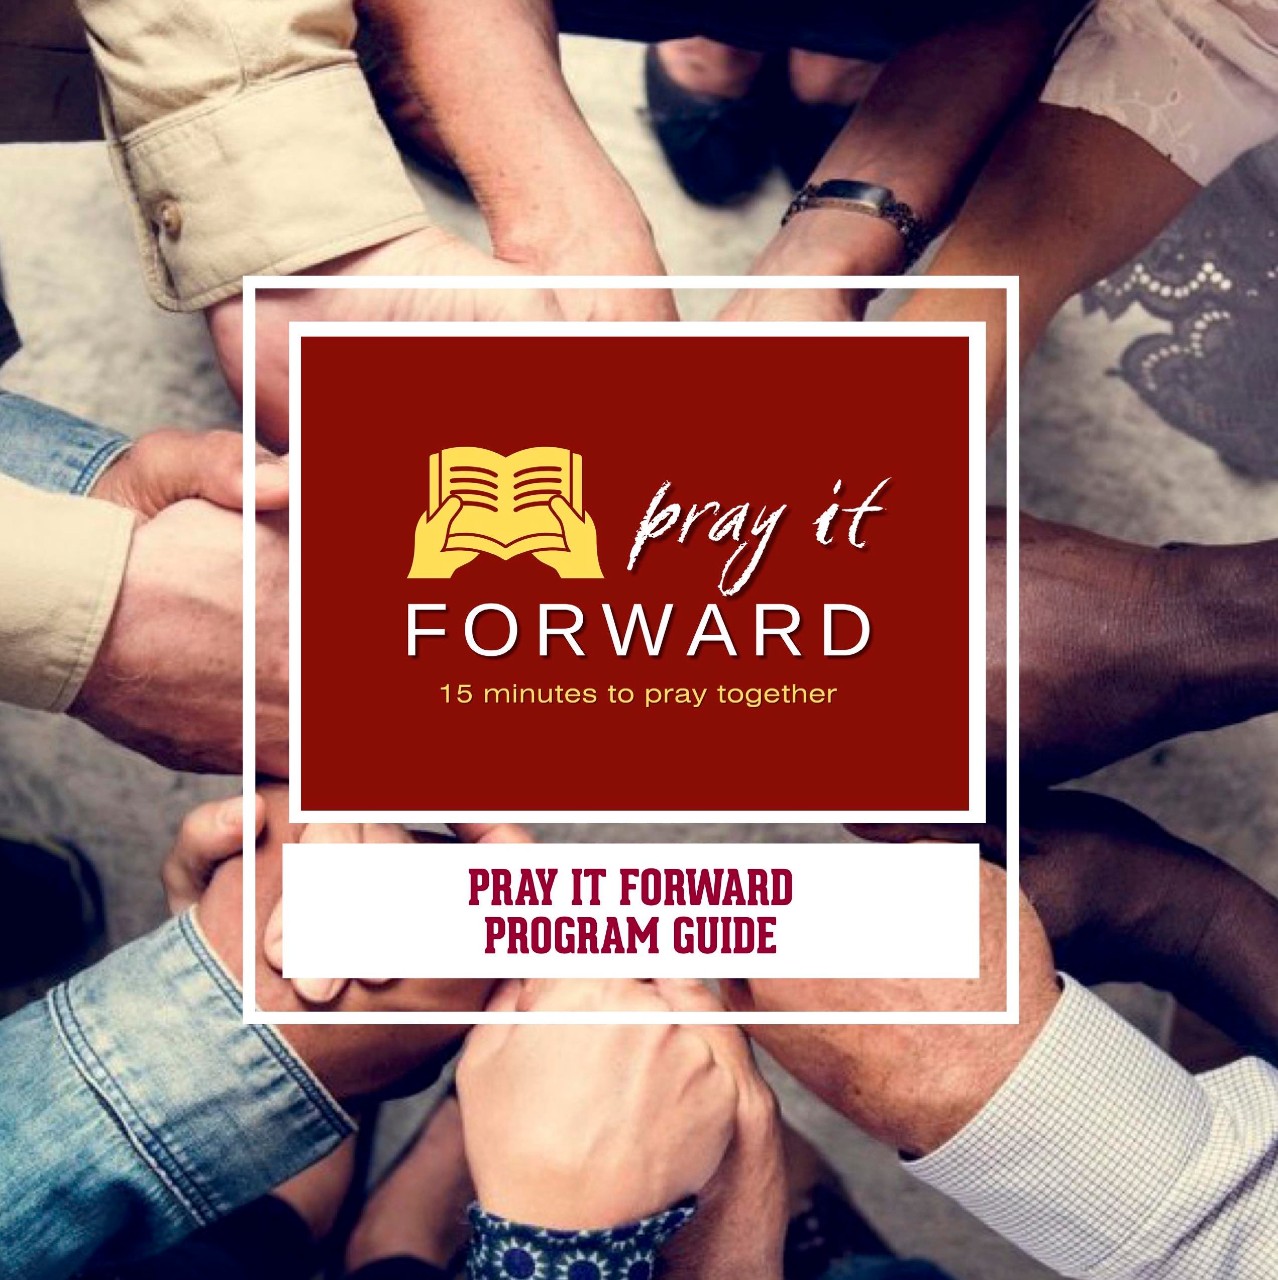 Pray It Forward Program Guide / 15 minutes to pray together